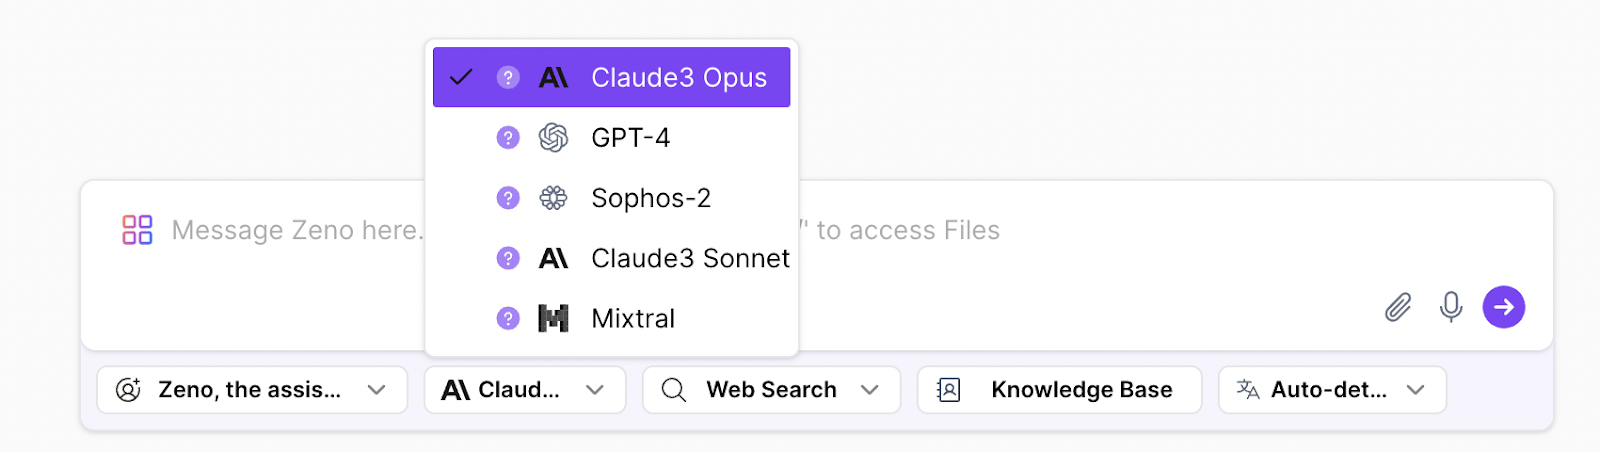 how to access claude 3 for free?